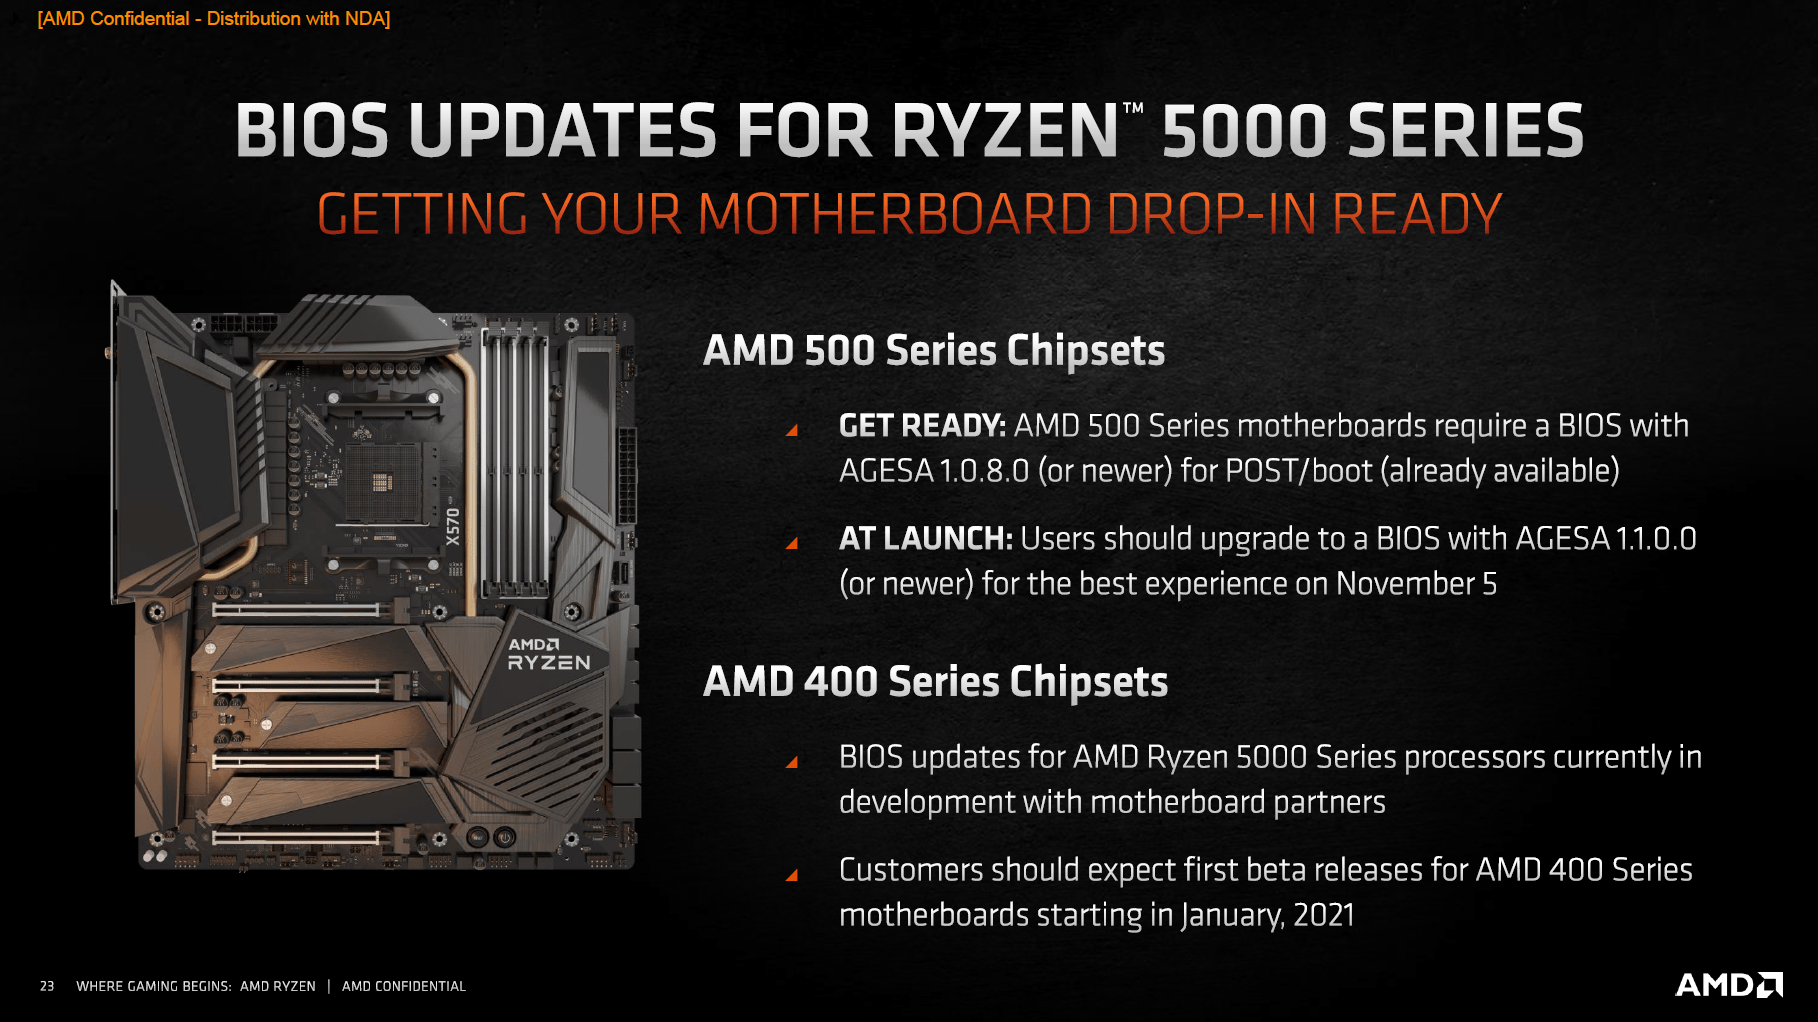 AMD Ryzen 5000 processors already supported on most A520, B550 and